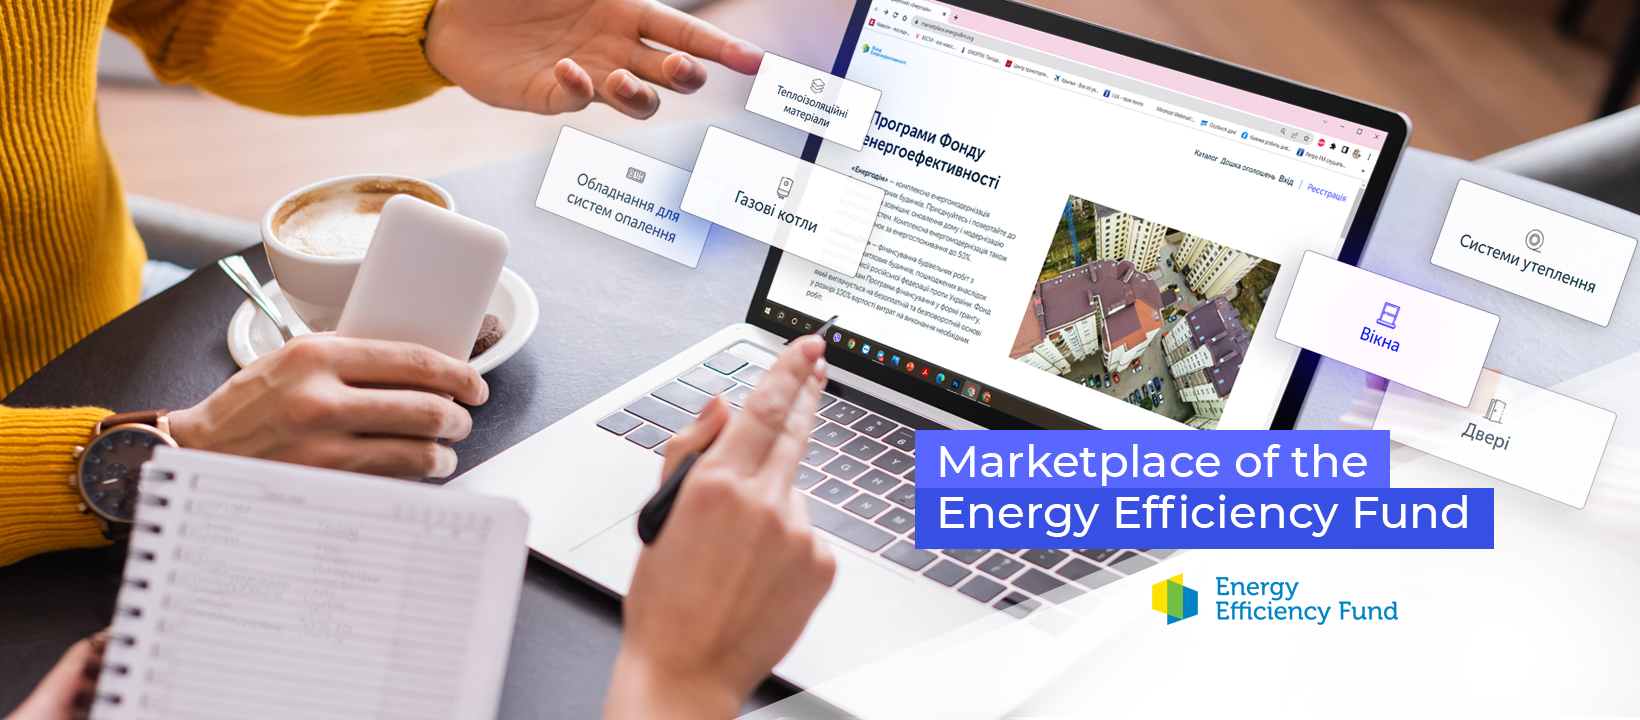 The Energy Efficiency Fund has launched a marketplace